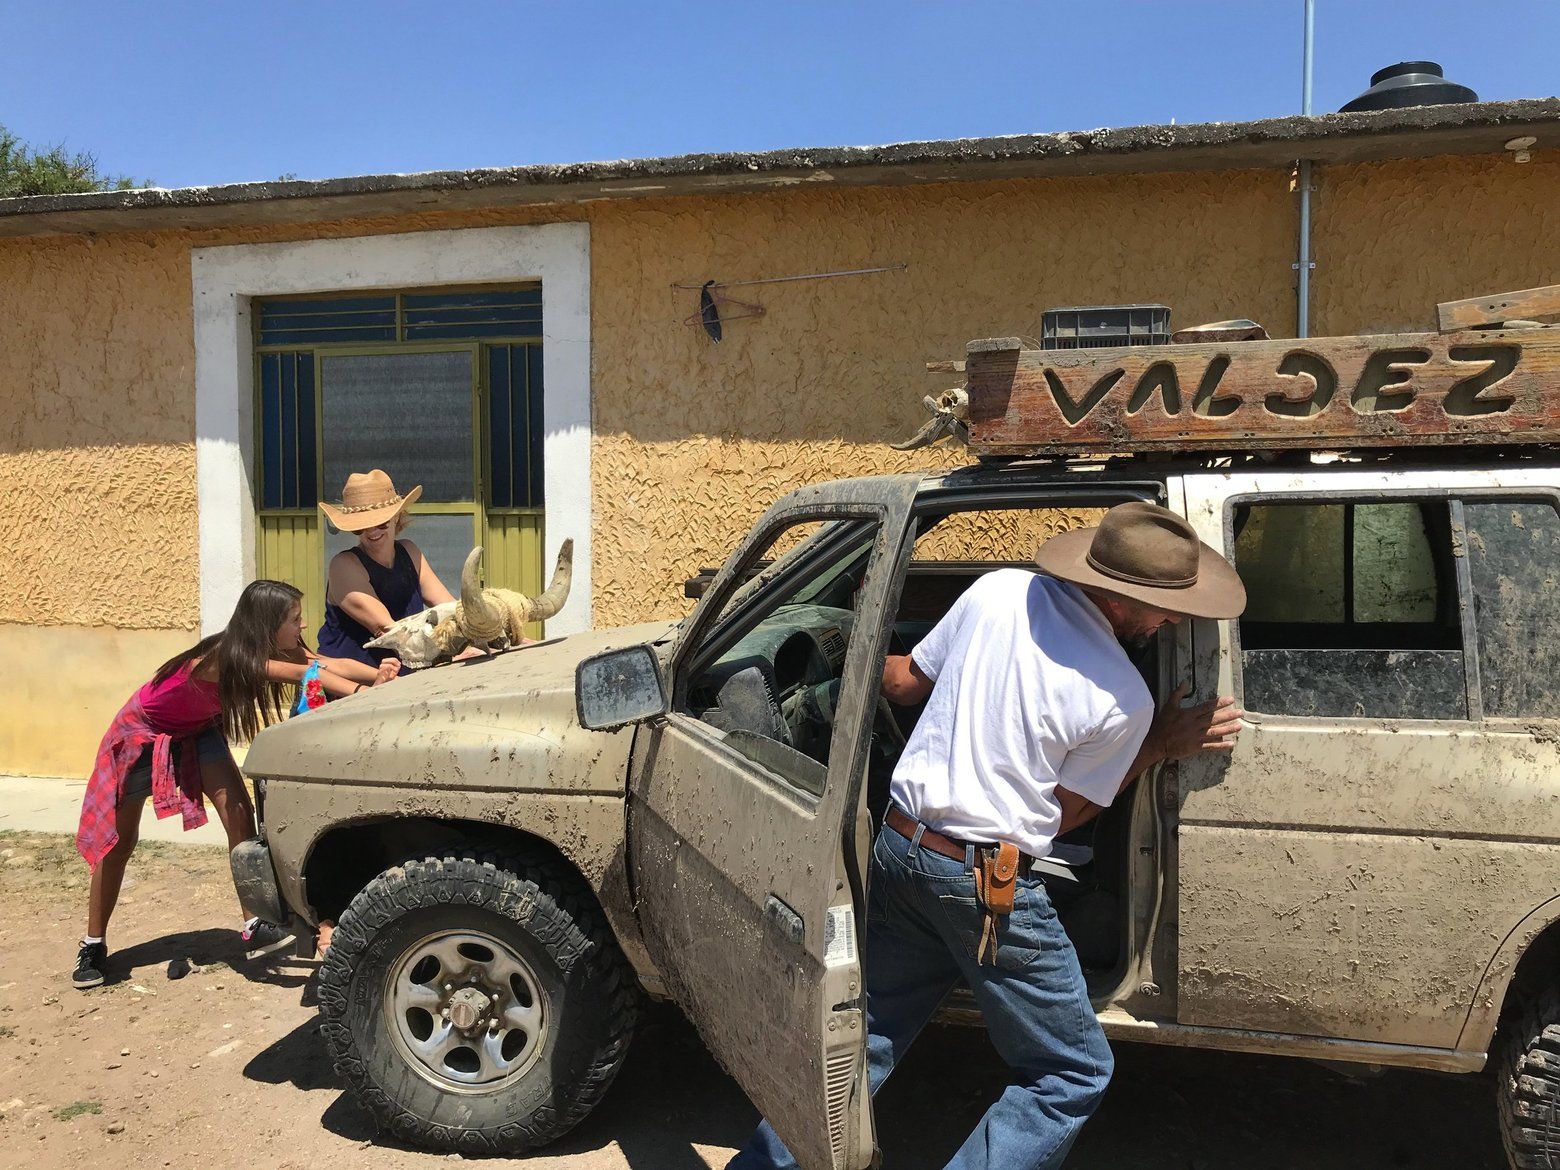 Maya, Joy and Rafael Valdez push their SUV to get it started after the battery died. They use the vehicle in the countryside while sharing the roads. Image by Nina Shapiro. Mexico, 2019. 